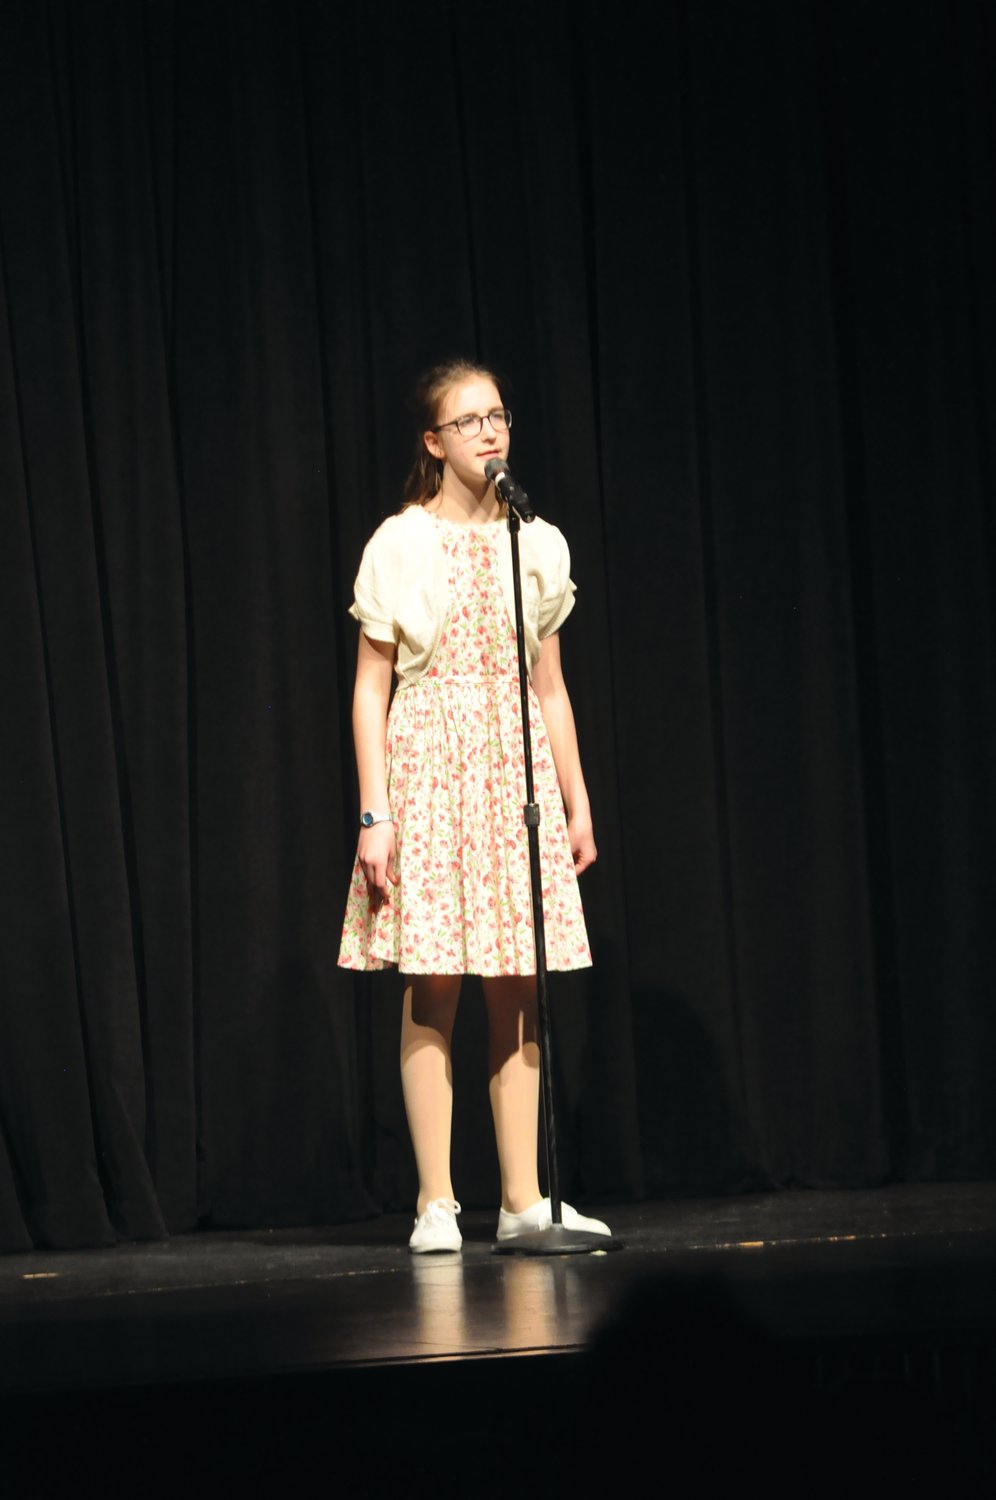 Amelia Wilkinson performs "How Far I'll Go" Saturday in the MoCo's Got Talent for Scholarships competition at Crawfordsville High School. Wilkinson received honorable mention at the alumni association fundraiser.